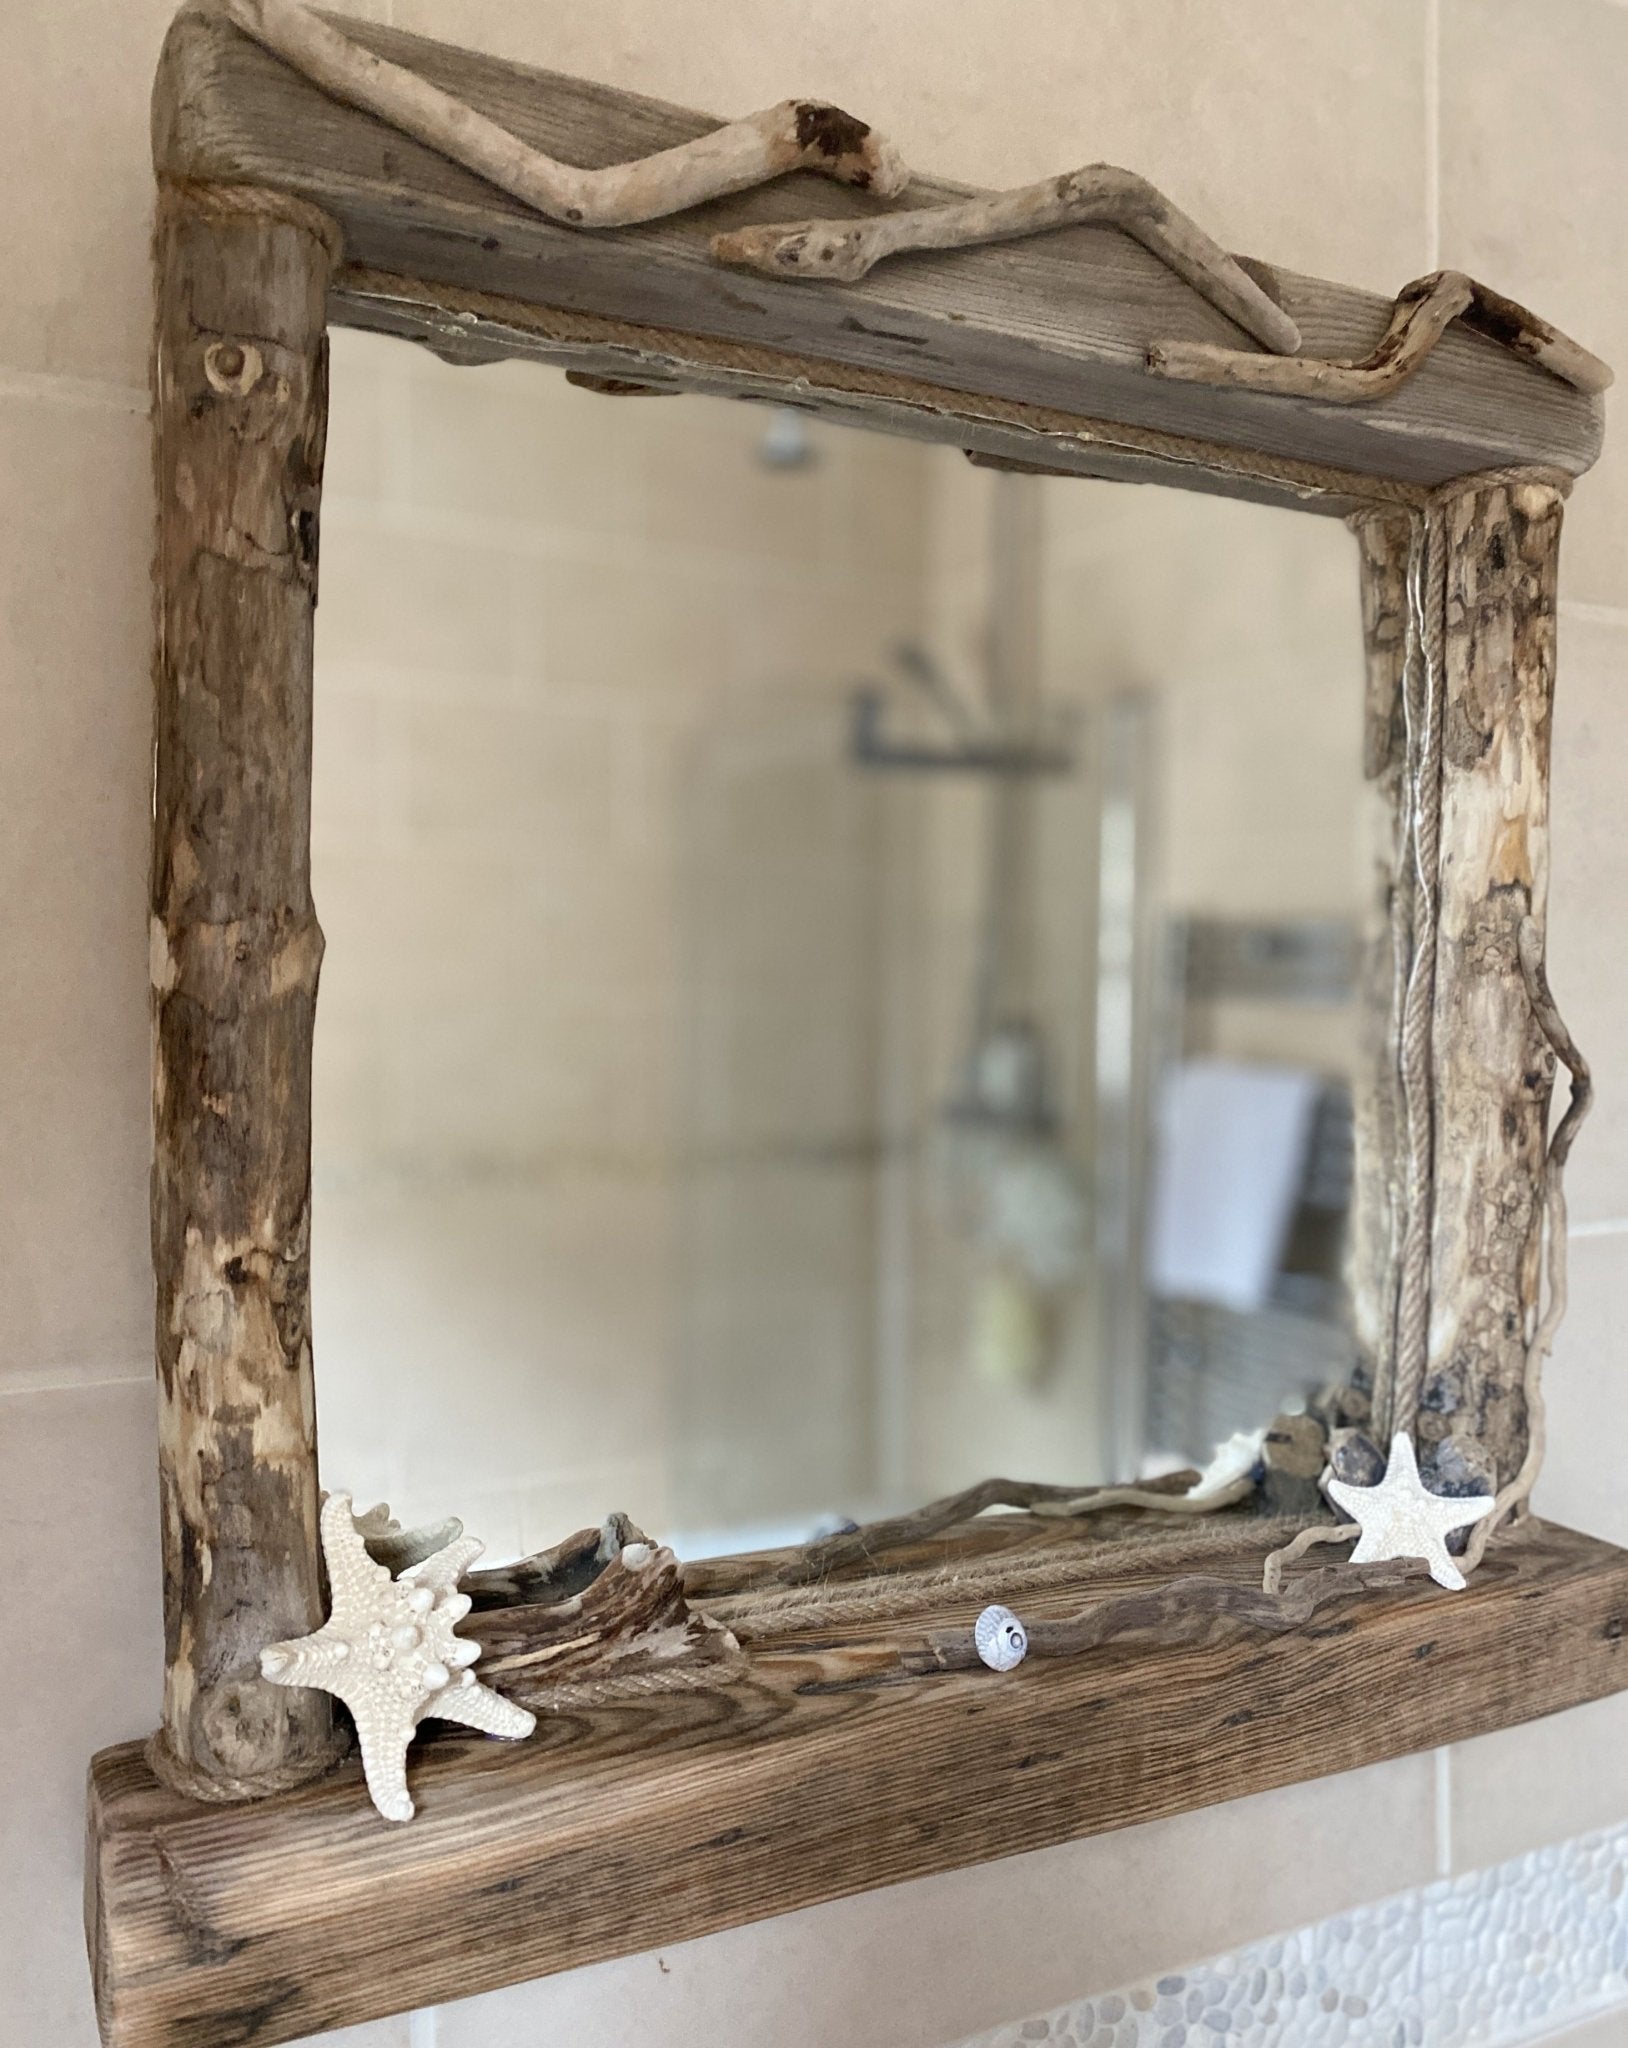 Driftwood Mirror - Square with Lights and Starfish Detail - Drift Craft by Jo